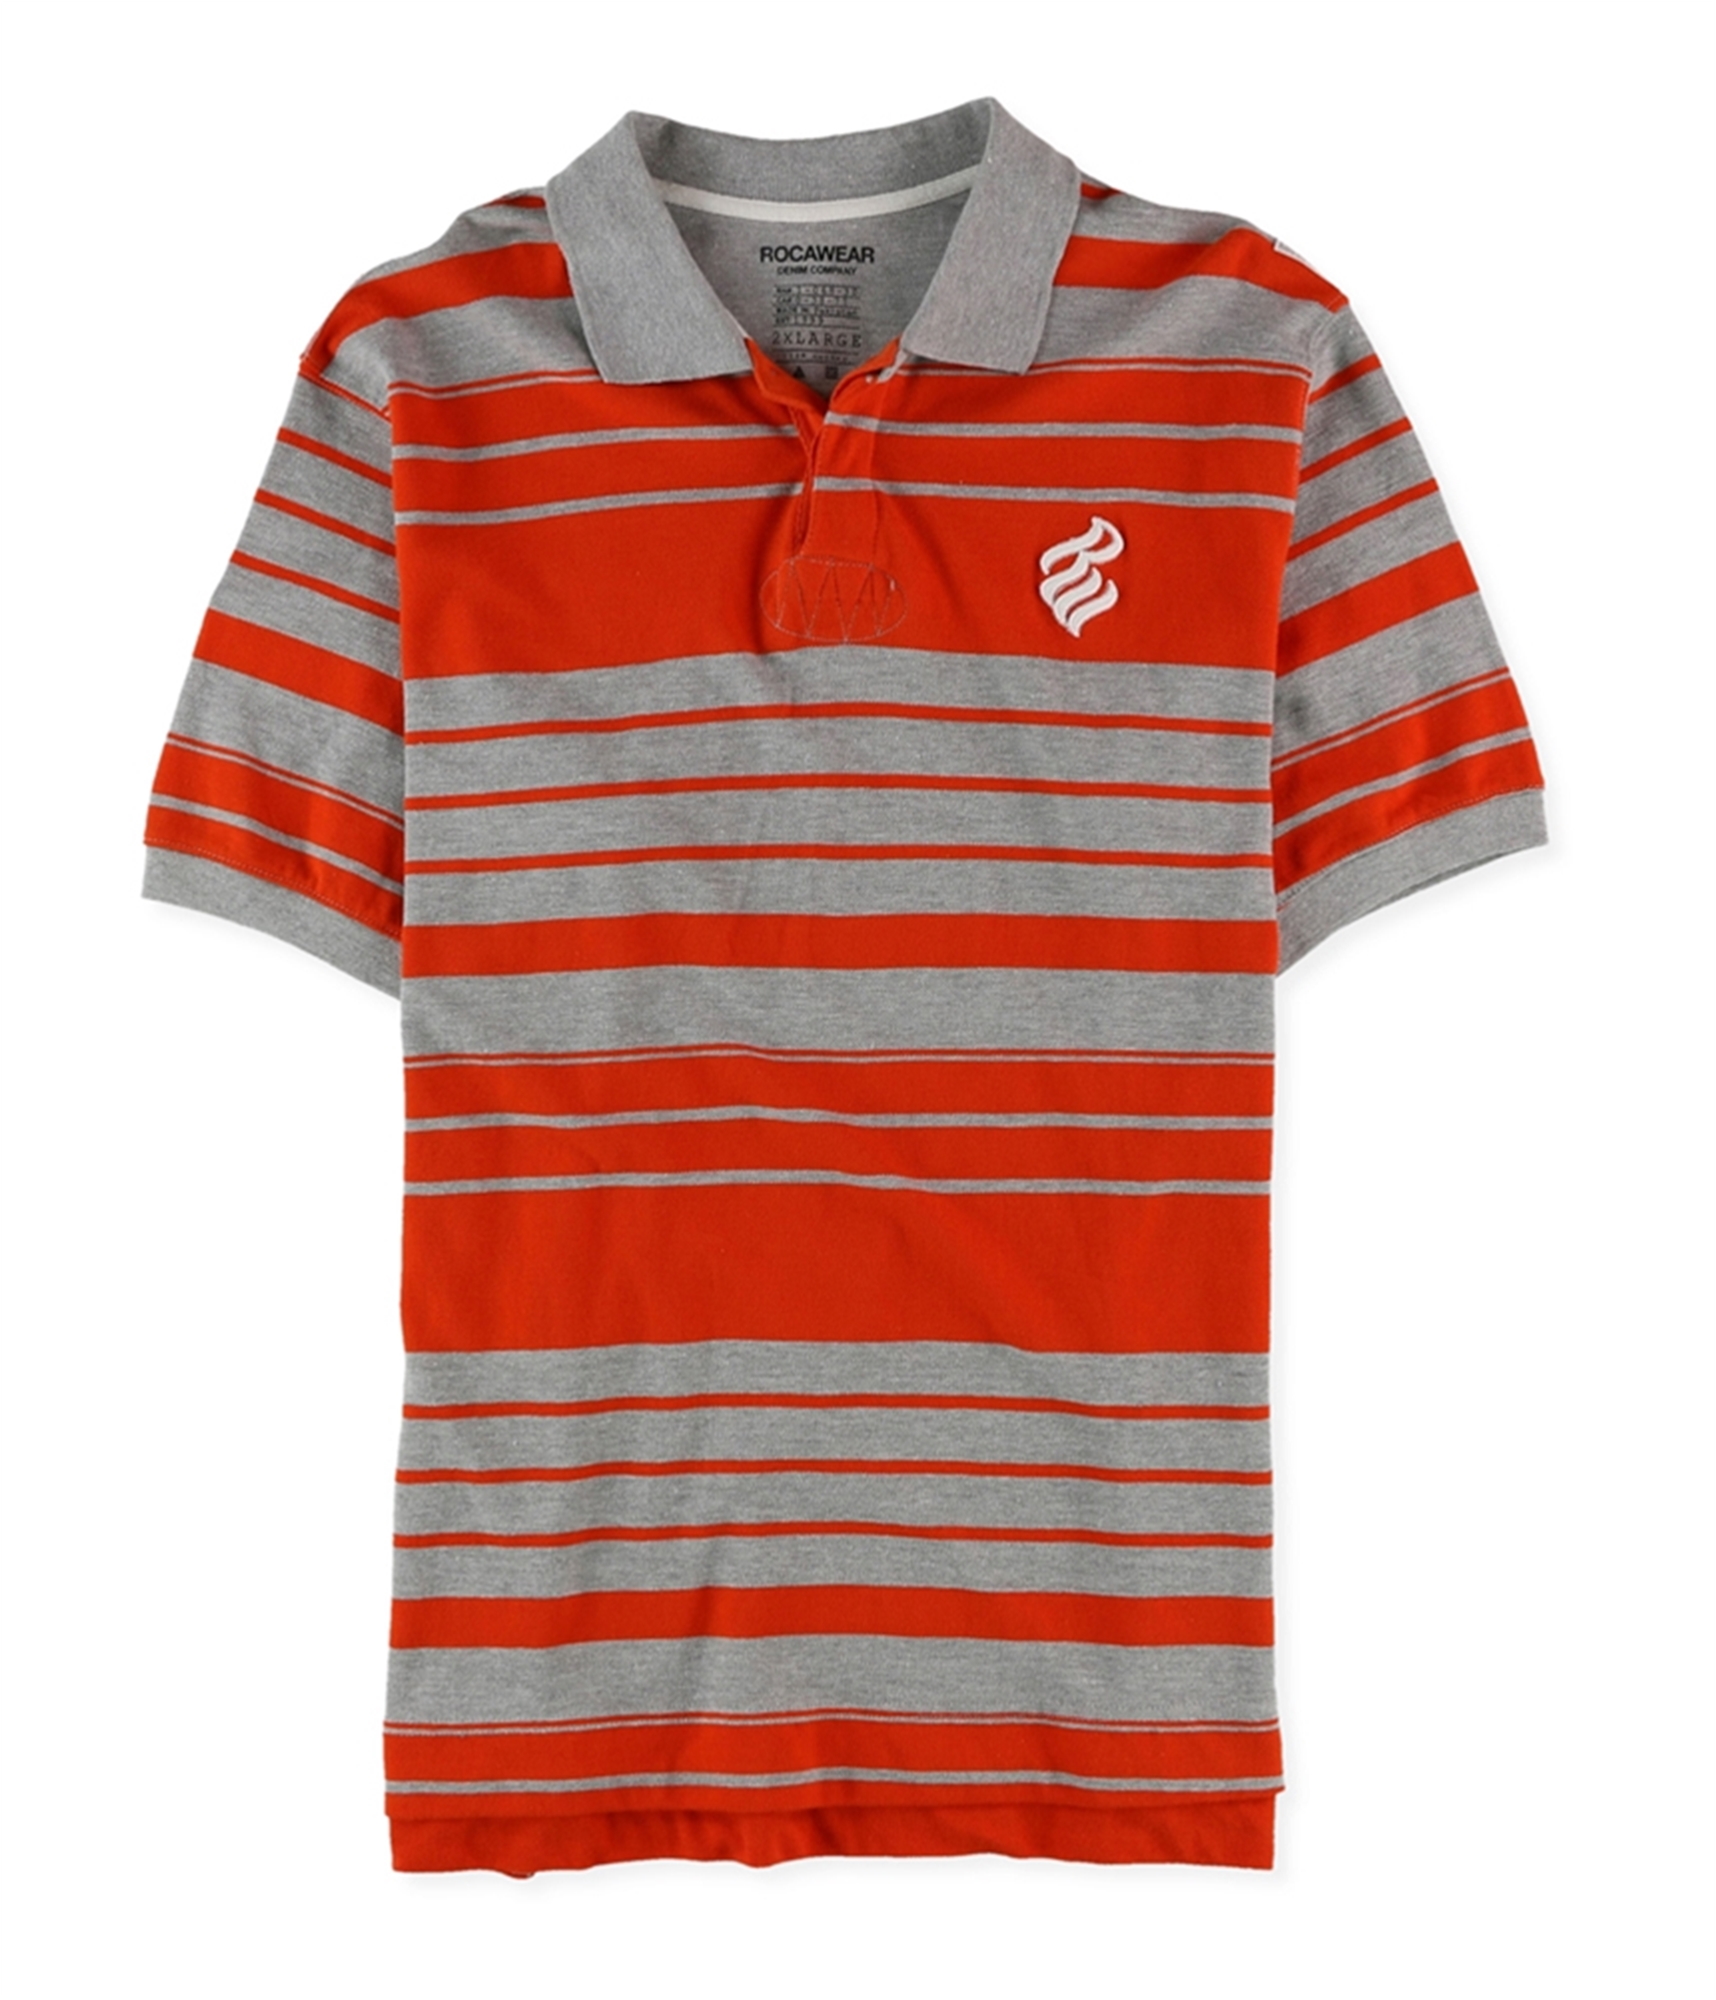 Buy a Mens Rocawear Variegated Rugby Polo Shirt Online | TagsWeekly.com